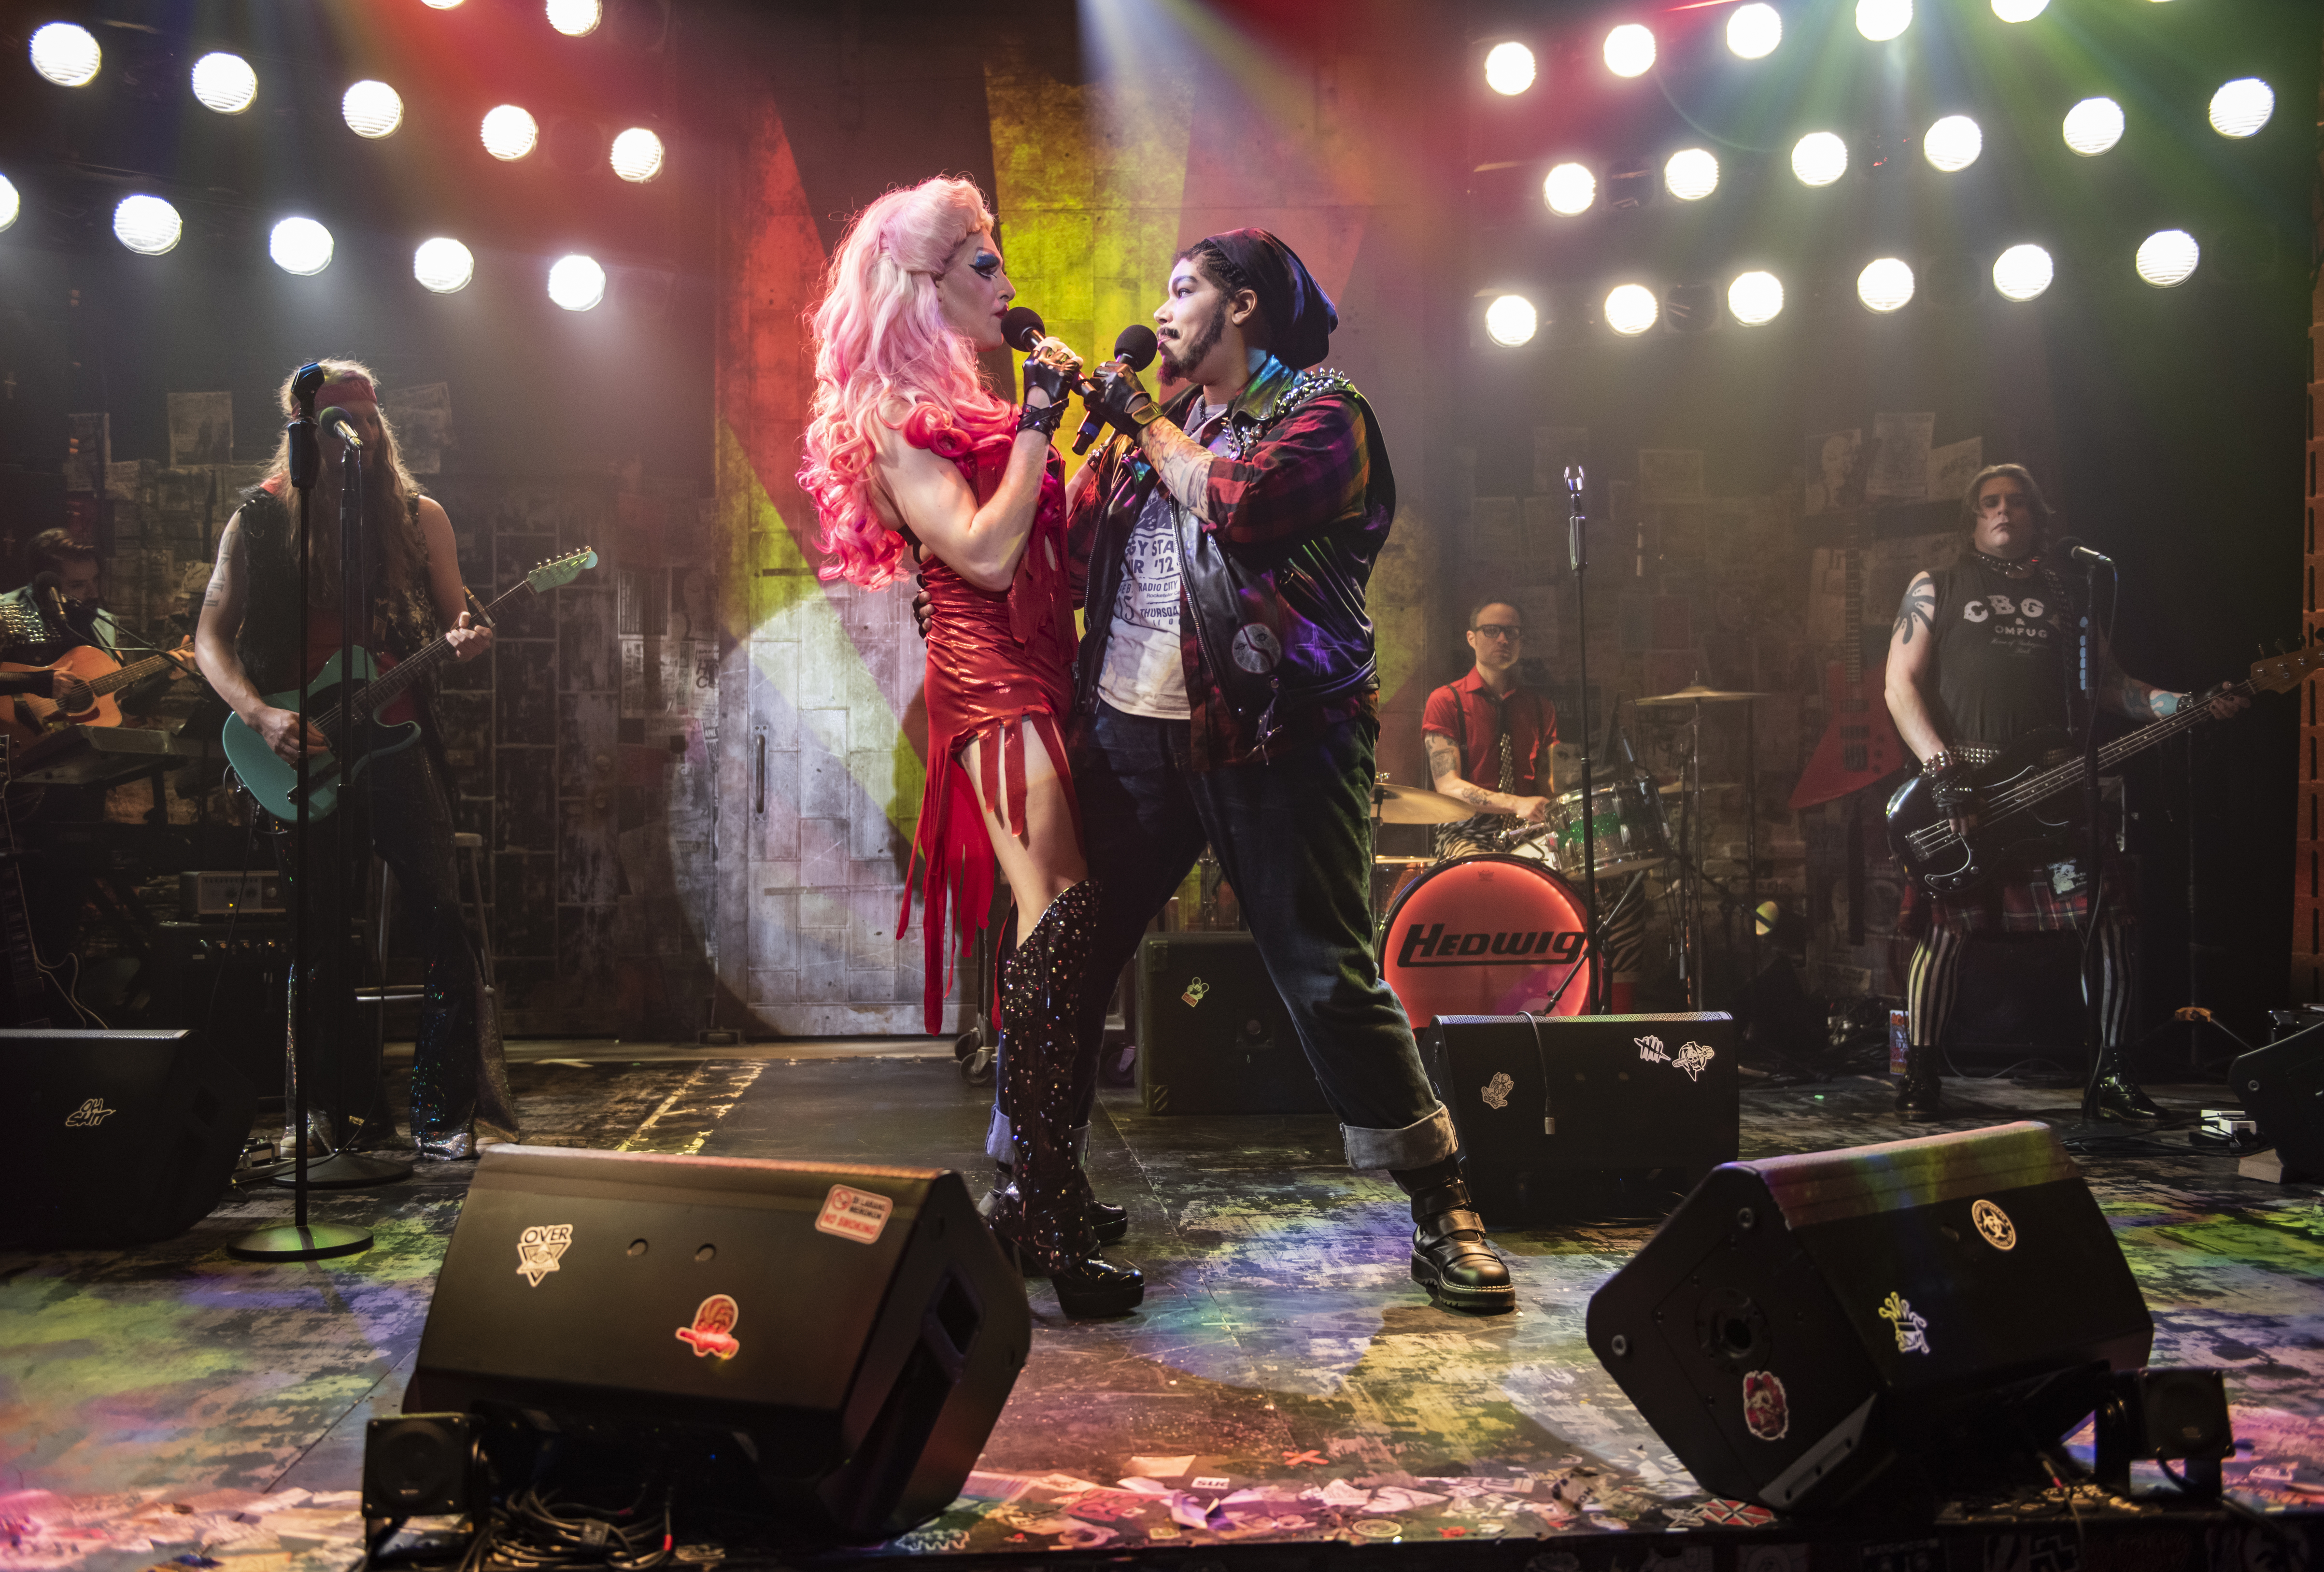 Milwaukee Repertory Theater presents Hedwig and the Angry Inch in the Stiemke Studio January 28 – March 8, 2020. Left to right: Matt Rodin and Bethany Thomas with the company of Hedwig and the Angry Inch. Photo by Michael Brosilow.